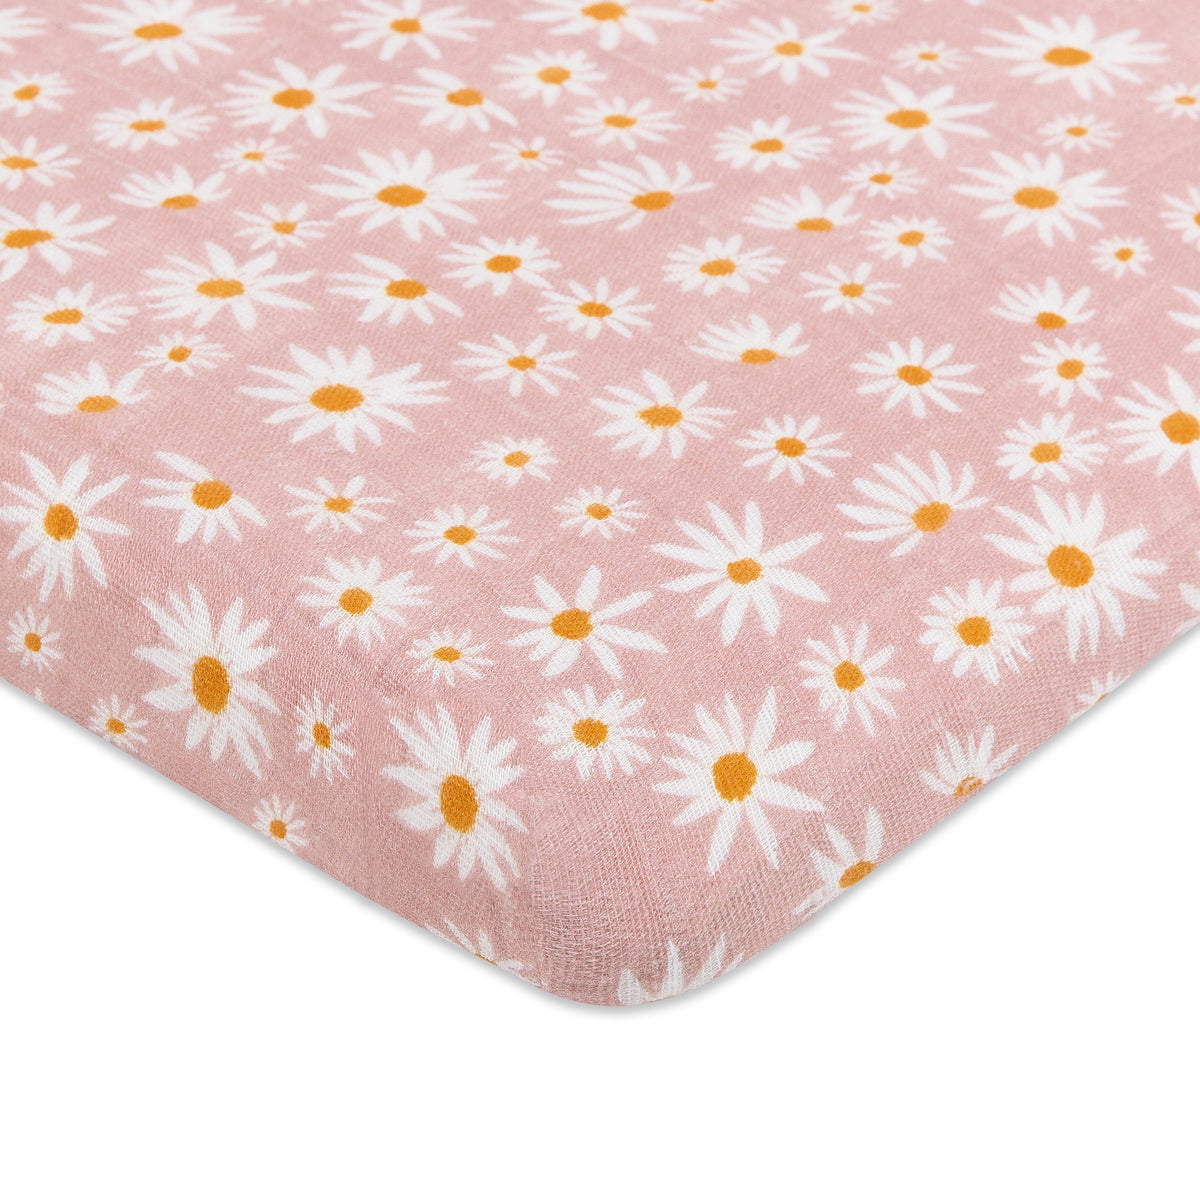 All-Stages Bassinet Sheet in GOTS-Certified Organic Muslin Cotton - Daisy